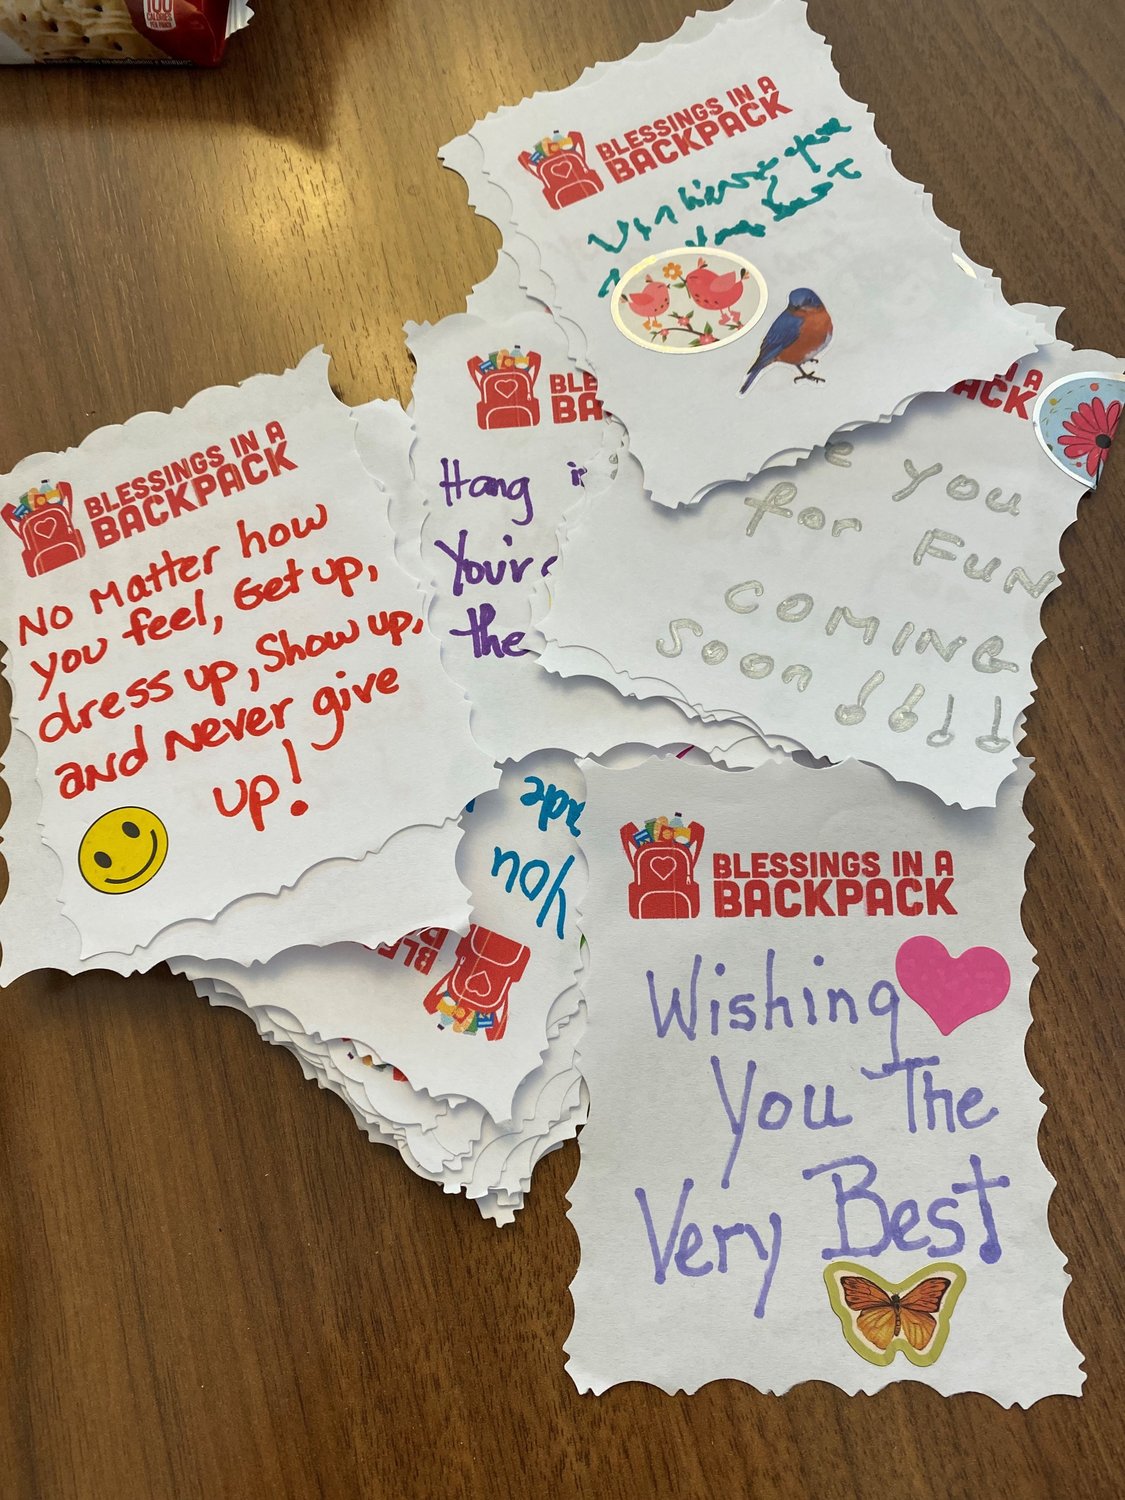 Special notes by Ponte Vedra Gardens residents and staff, written to the children who will receive the bags of food.